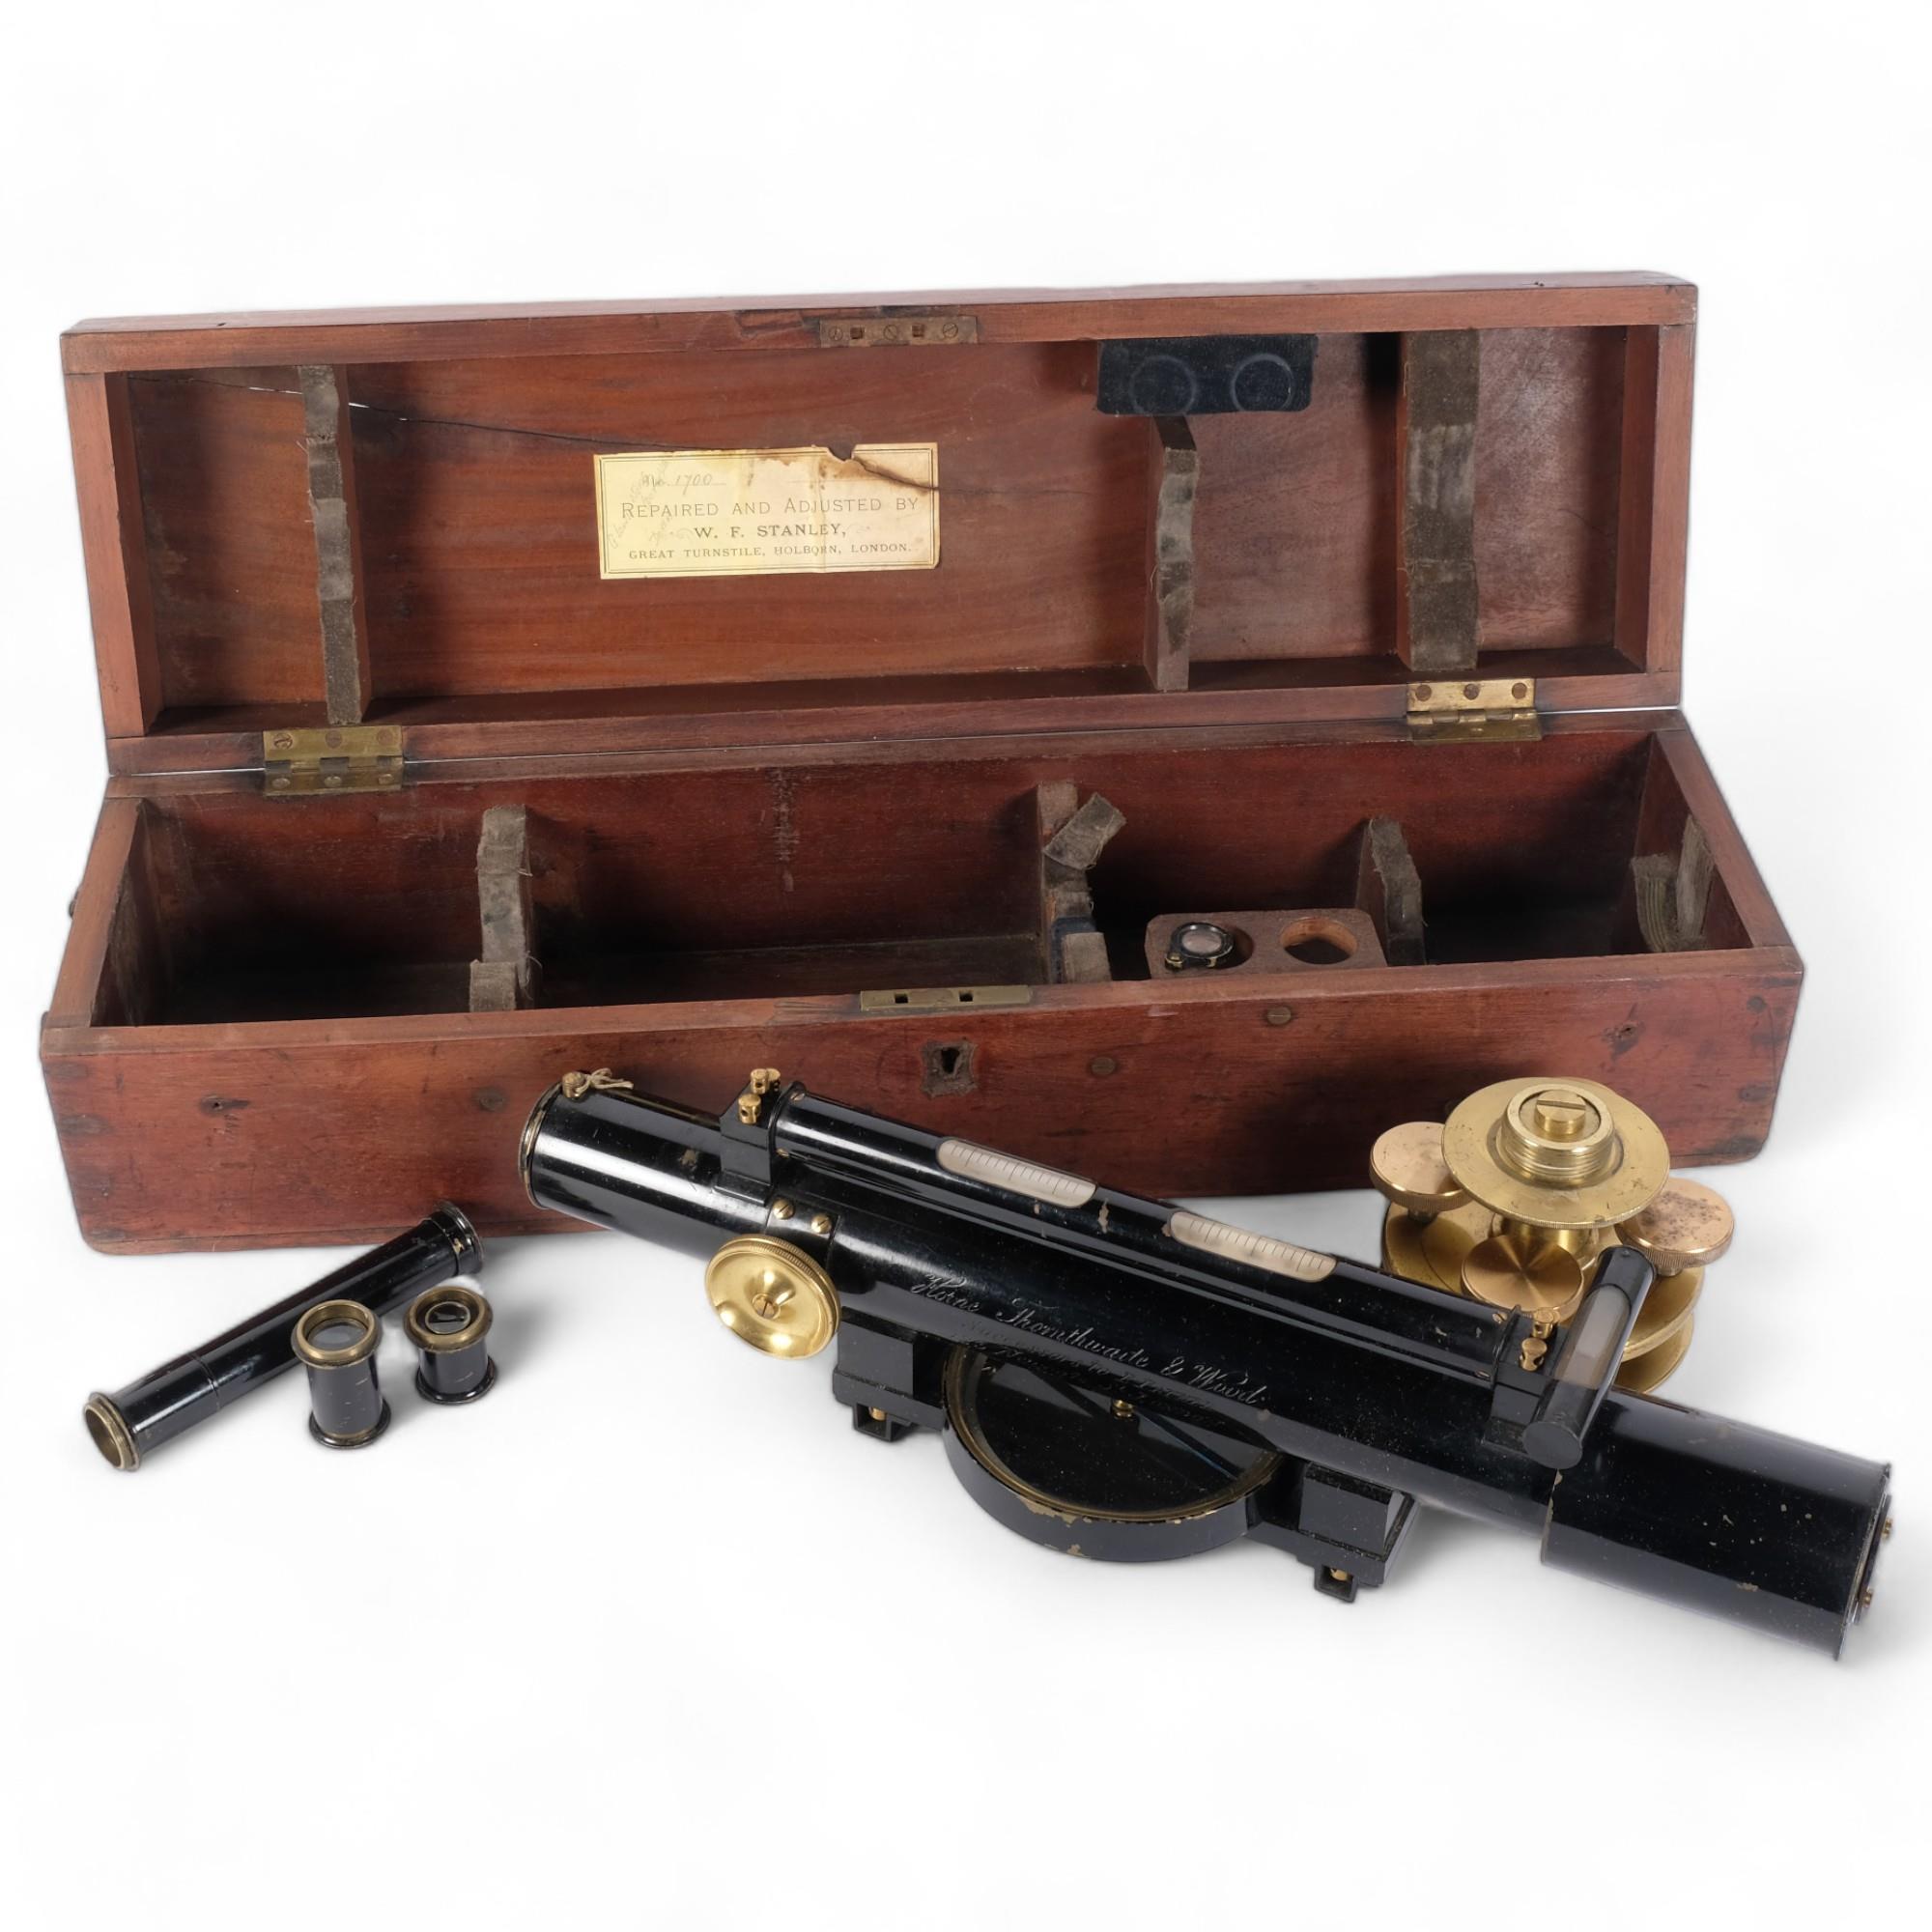 Horne Thornthwaite & Wood, an early 20th century surveyor's level with accessories, cased